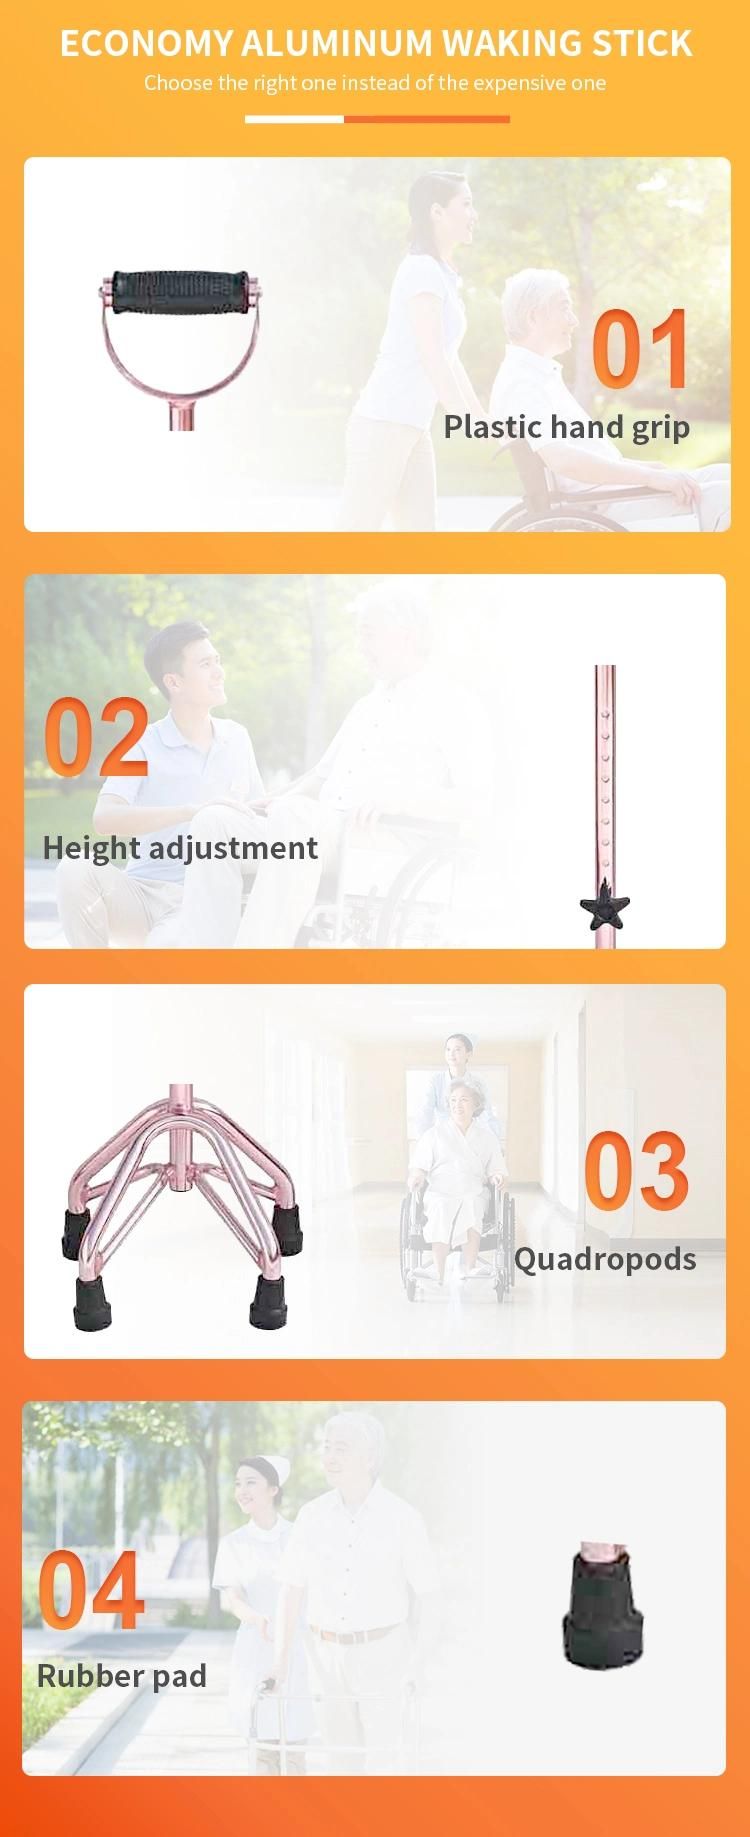 4 Four Legs Offset Handle Quad Cane Aluminum Walking Stick Quadropods Big Base Stable for The Disabled and Elderly